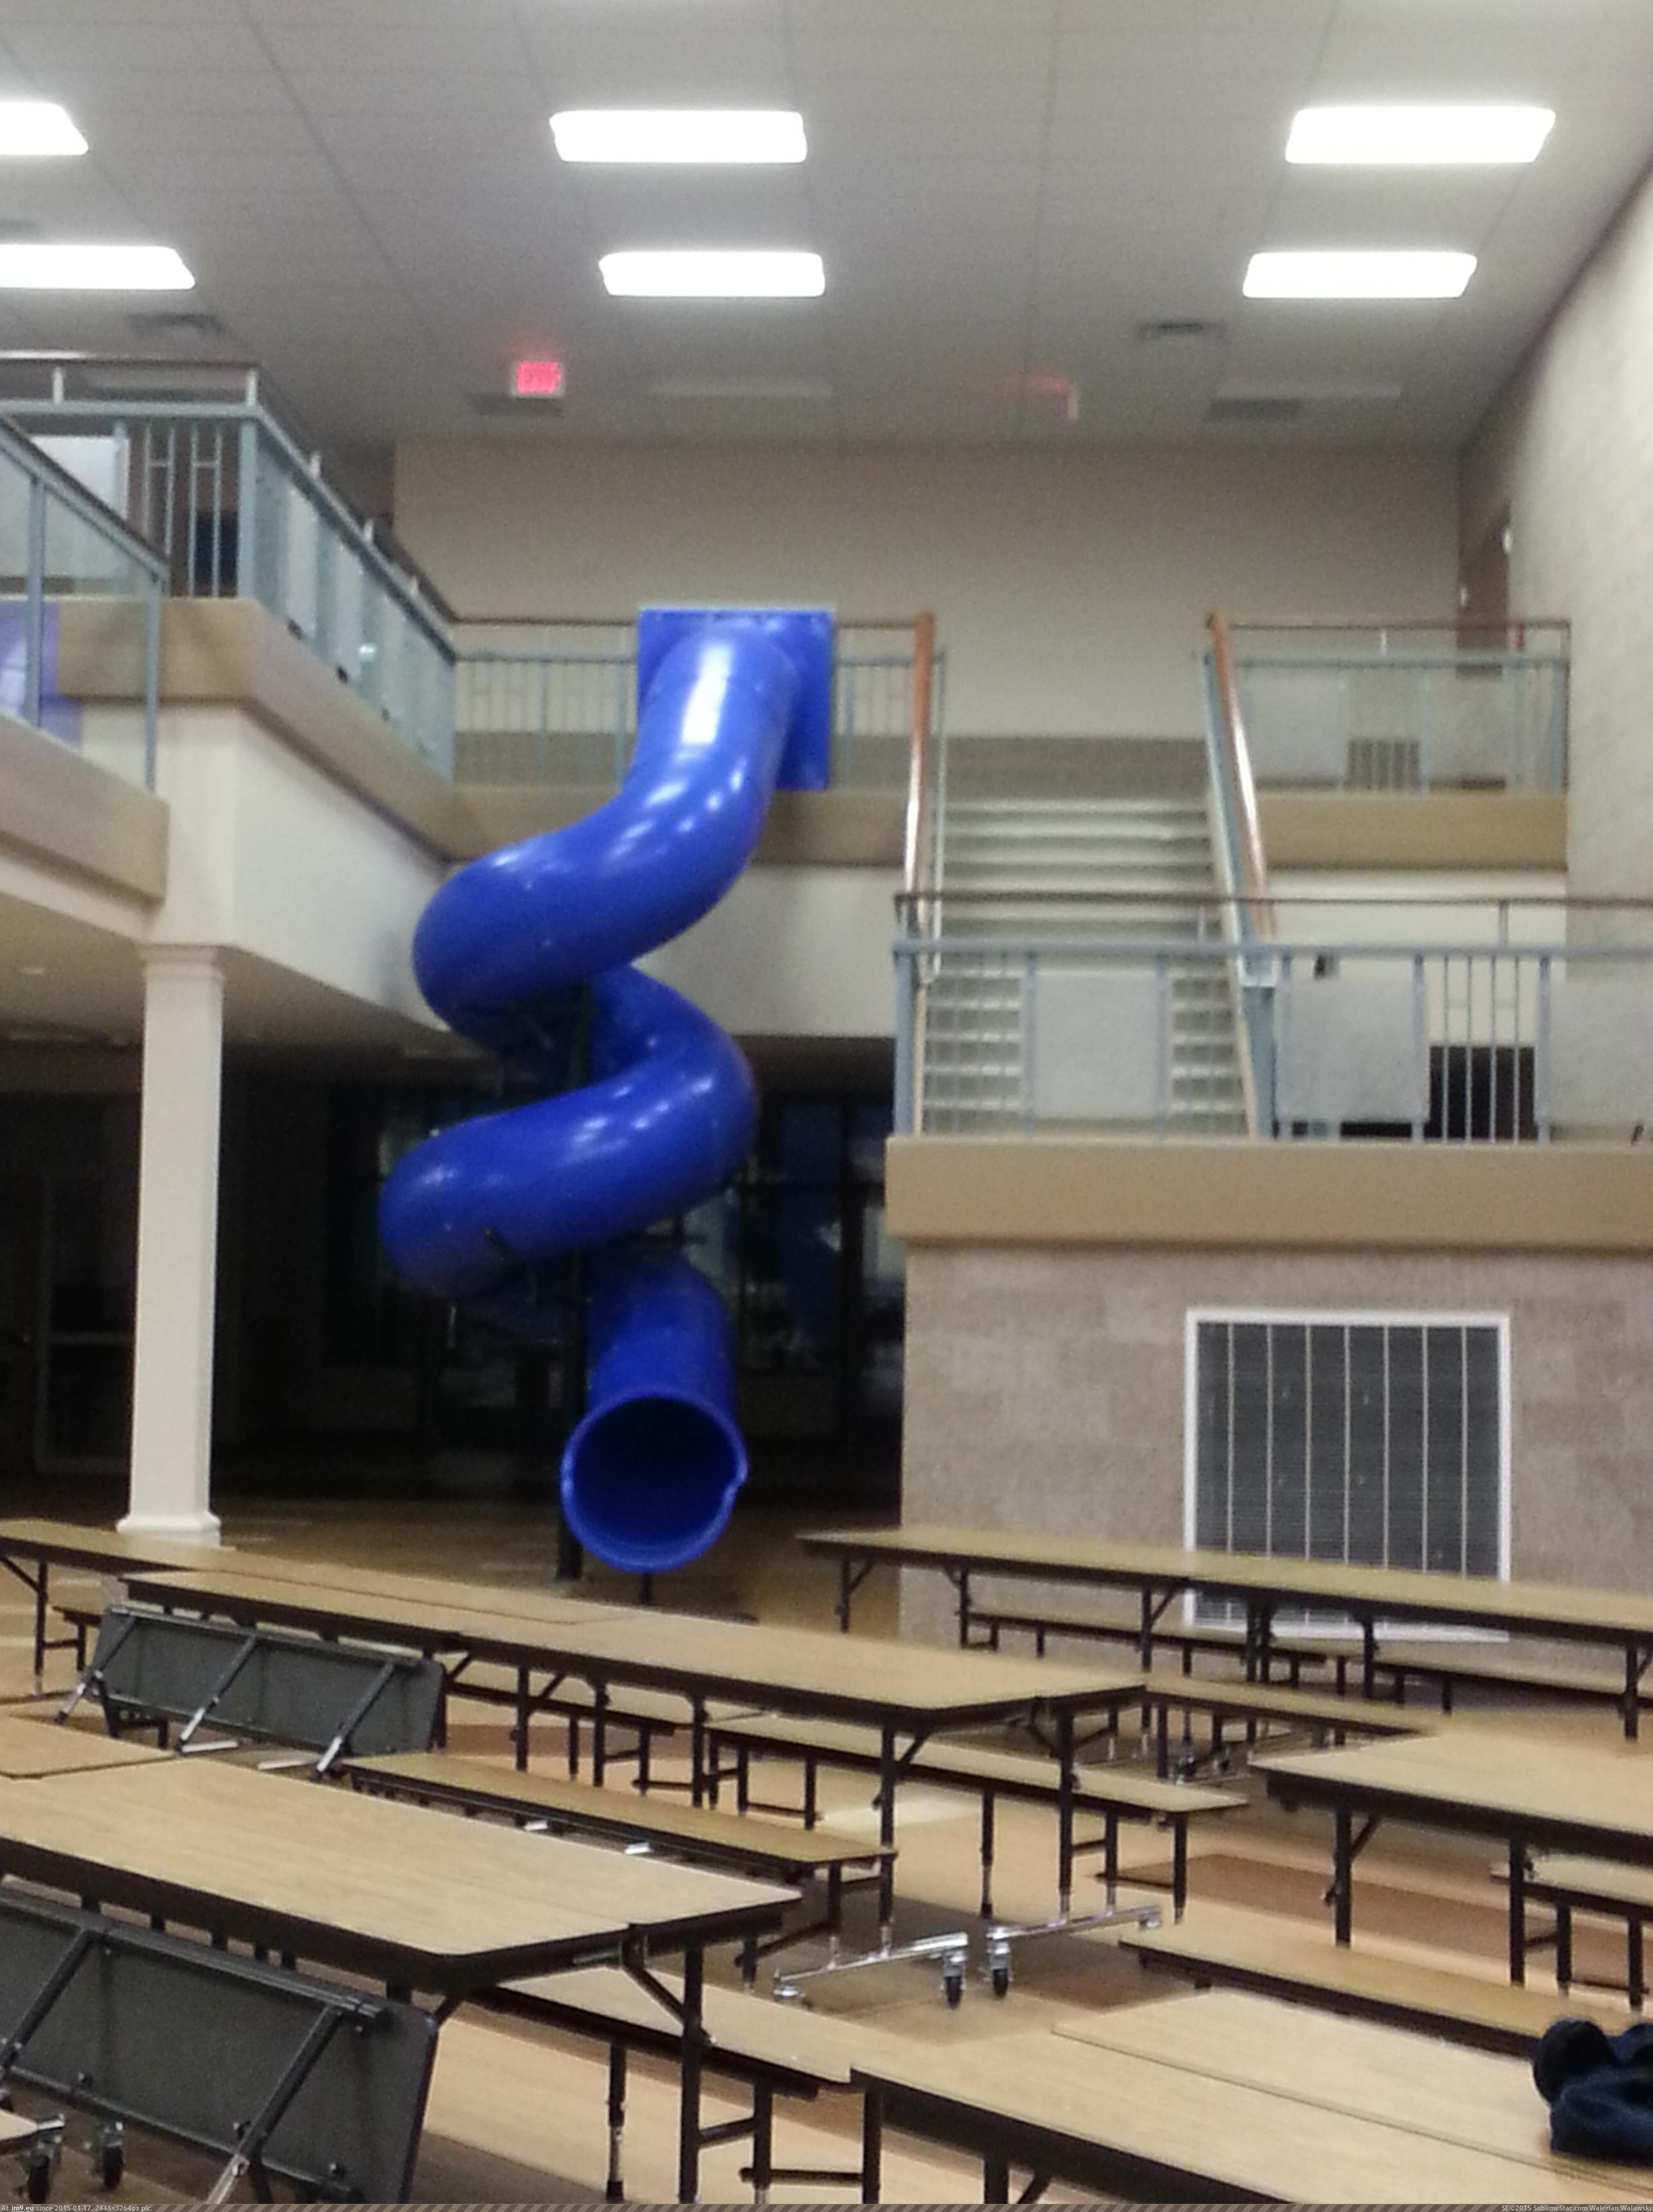 [Pics] My kid's new school has a twirly slide to get downstairs! (in My r/PICS favs)